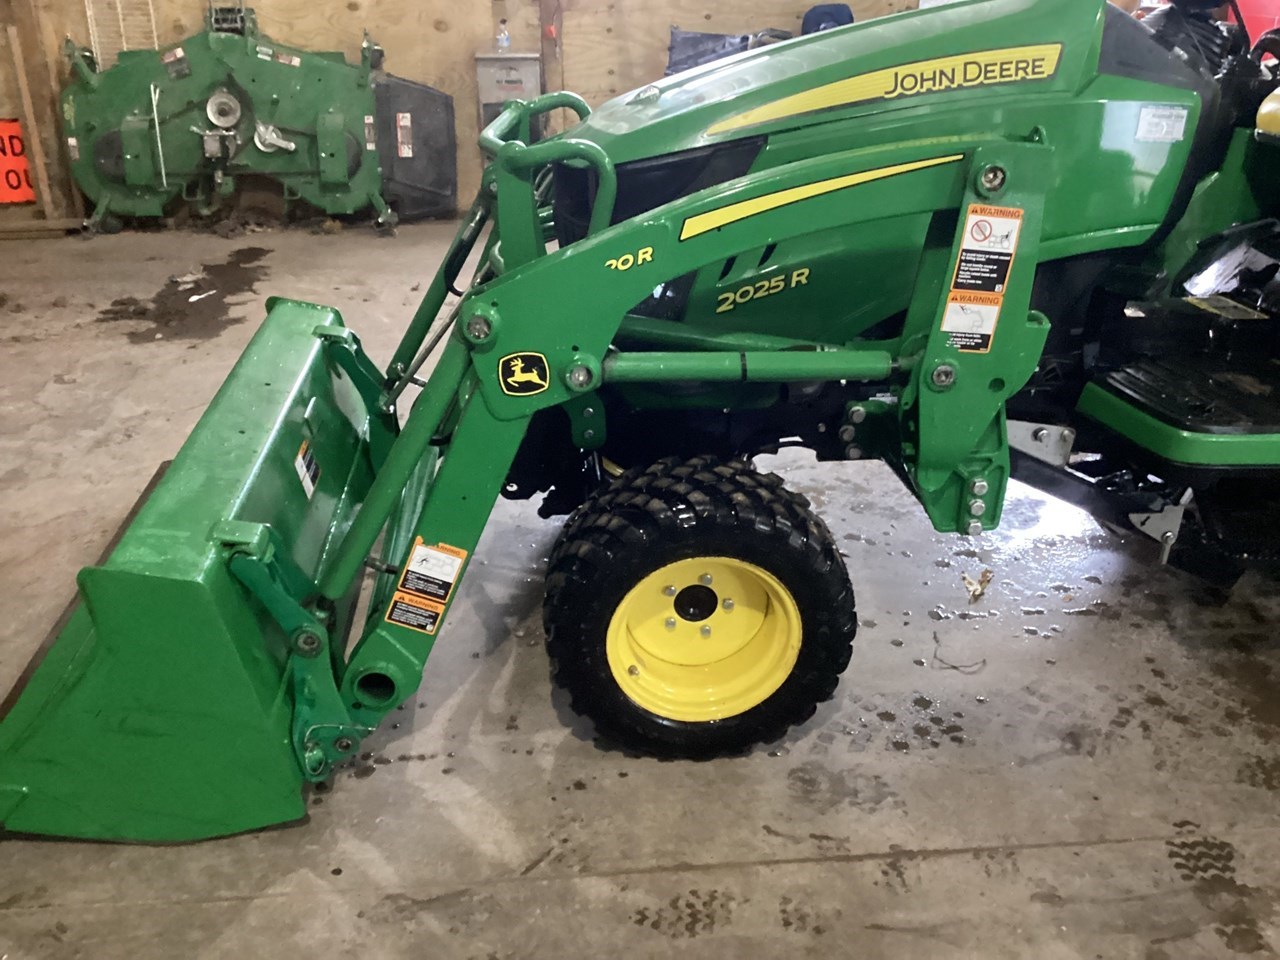 2017 John Deere 2025R Tractor - Compact Utility For Sale